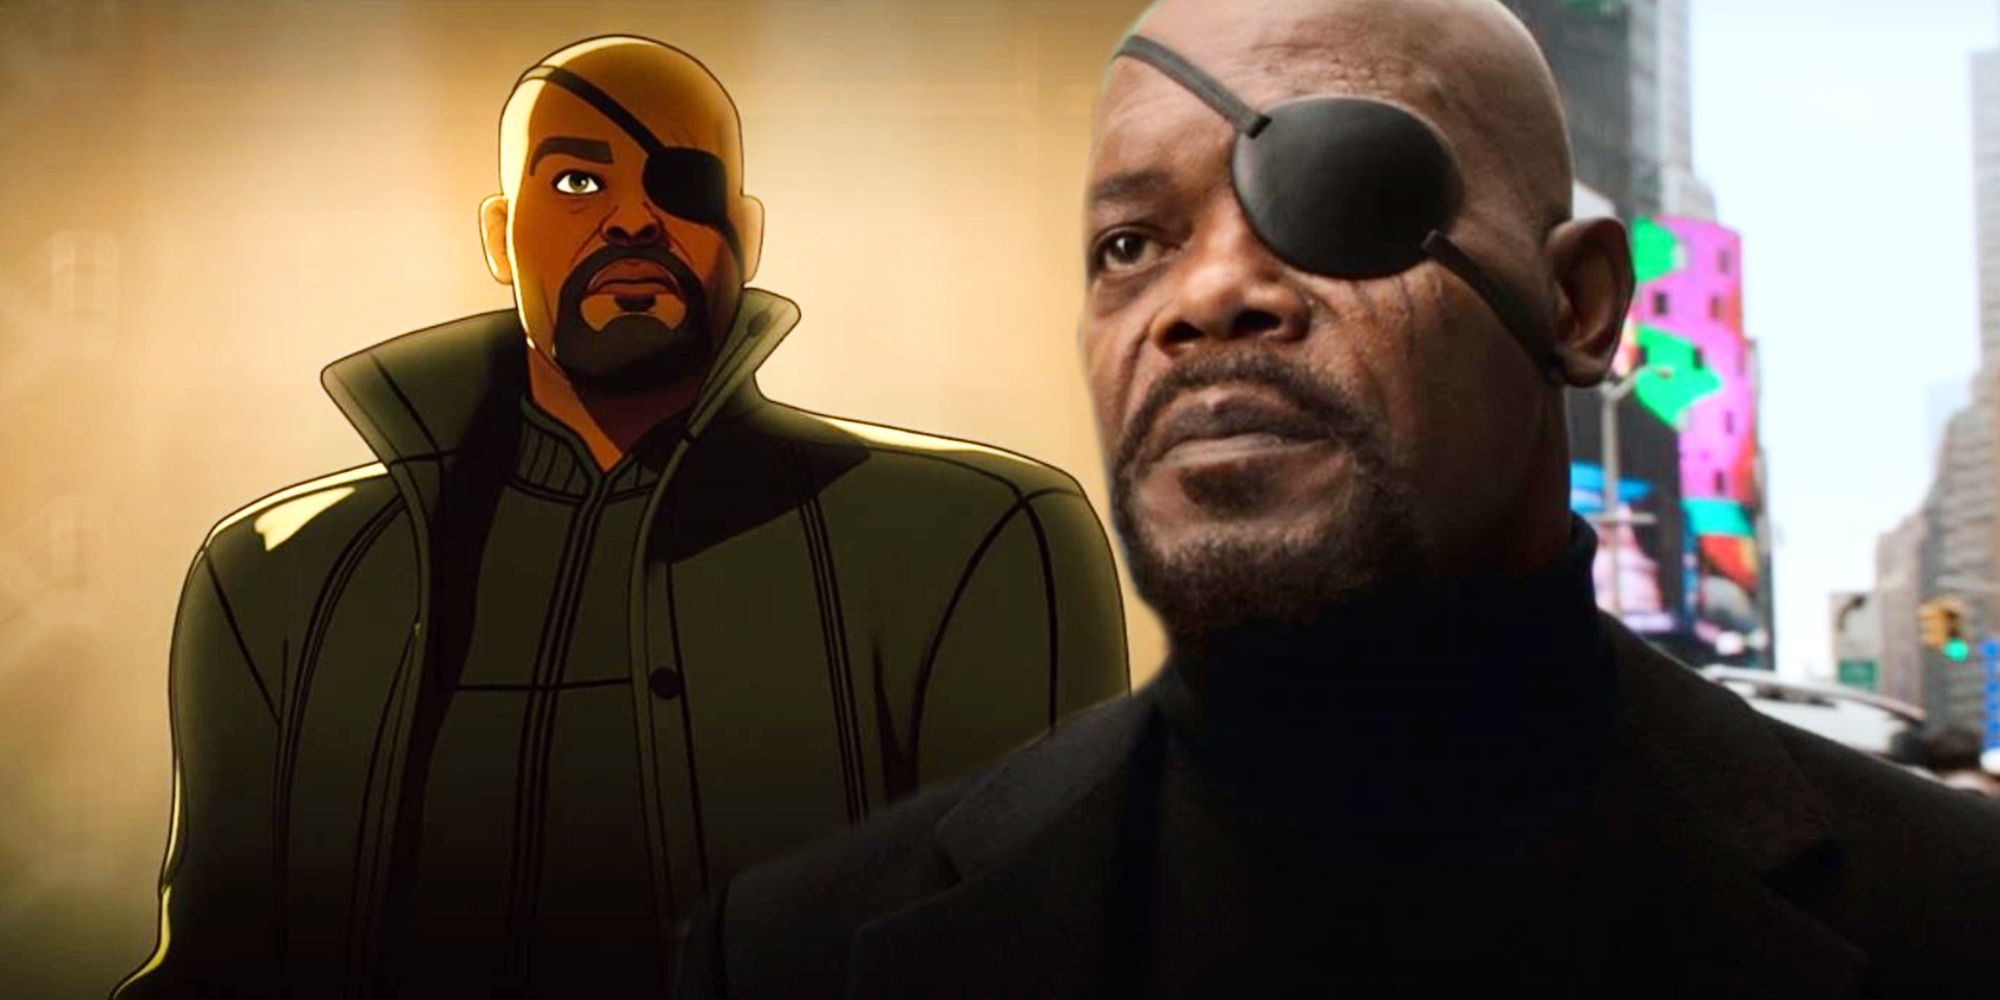 Samuel L Jackson as Nick Fury in What If and Captain America The First Avenger